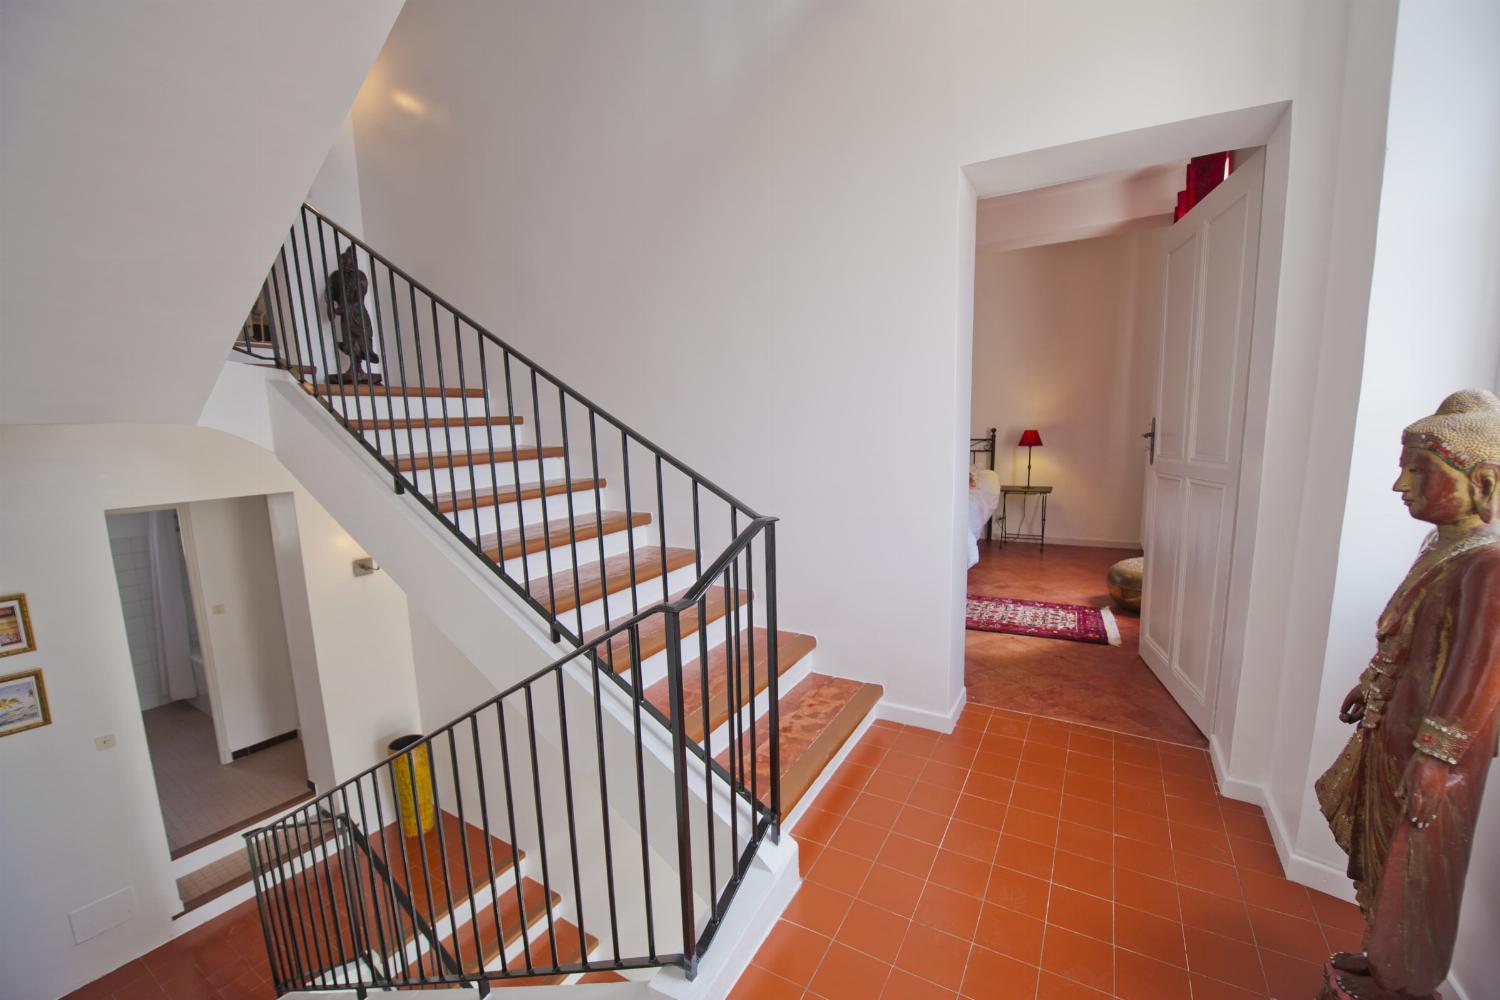 Staircase | Rental accommodation in Provence